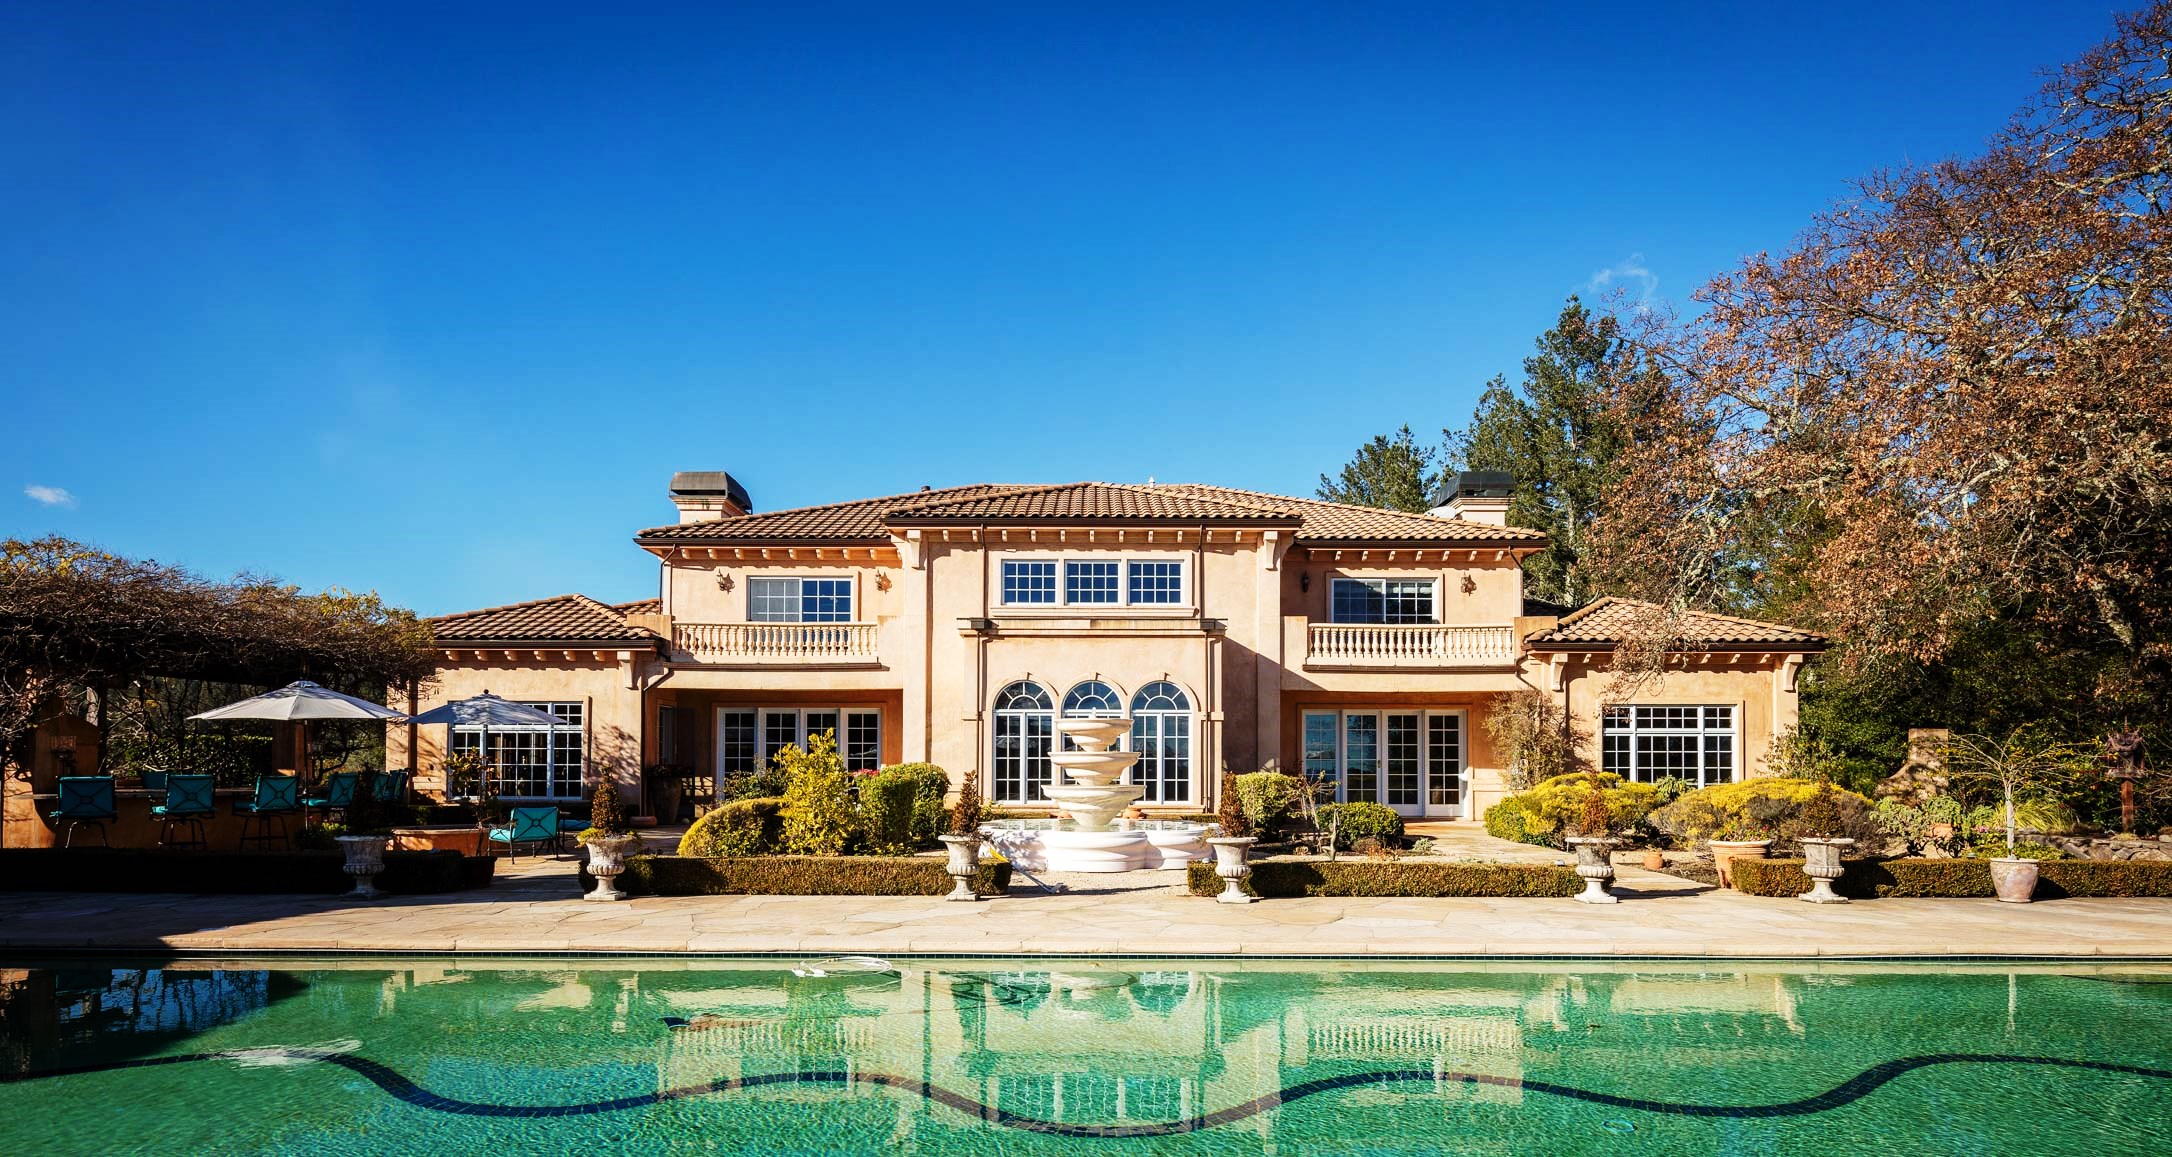 The facade of the sprawling estate house at 2900 Mountain Road, with a pool in front of it.